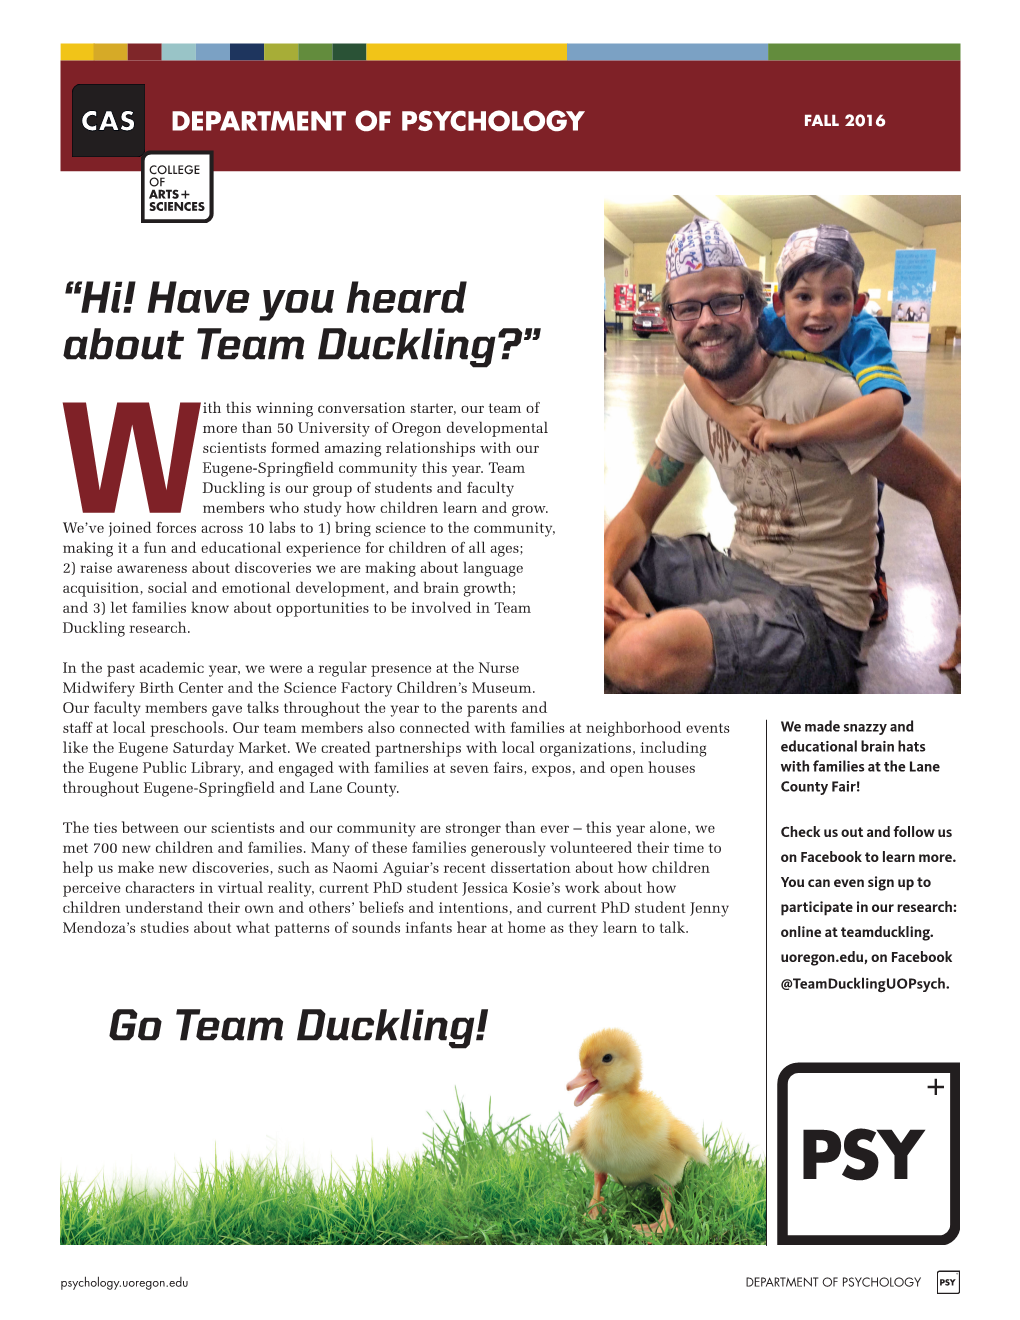 Hi! Have You Heard About Team Duckling?”